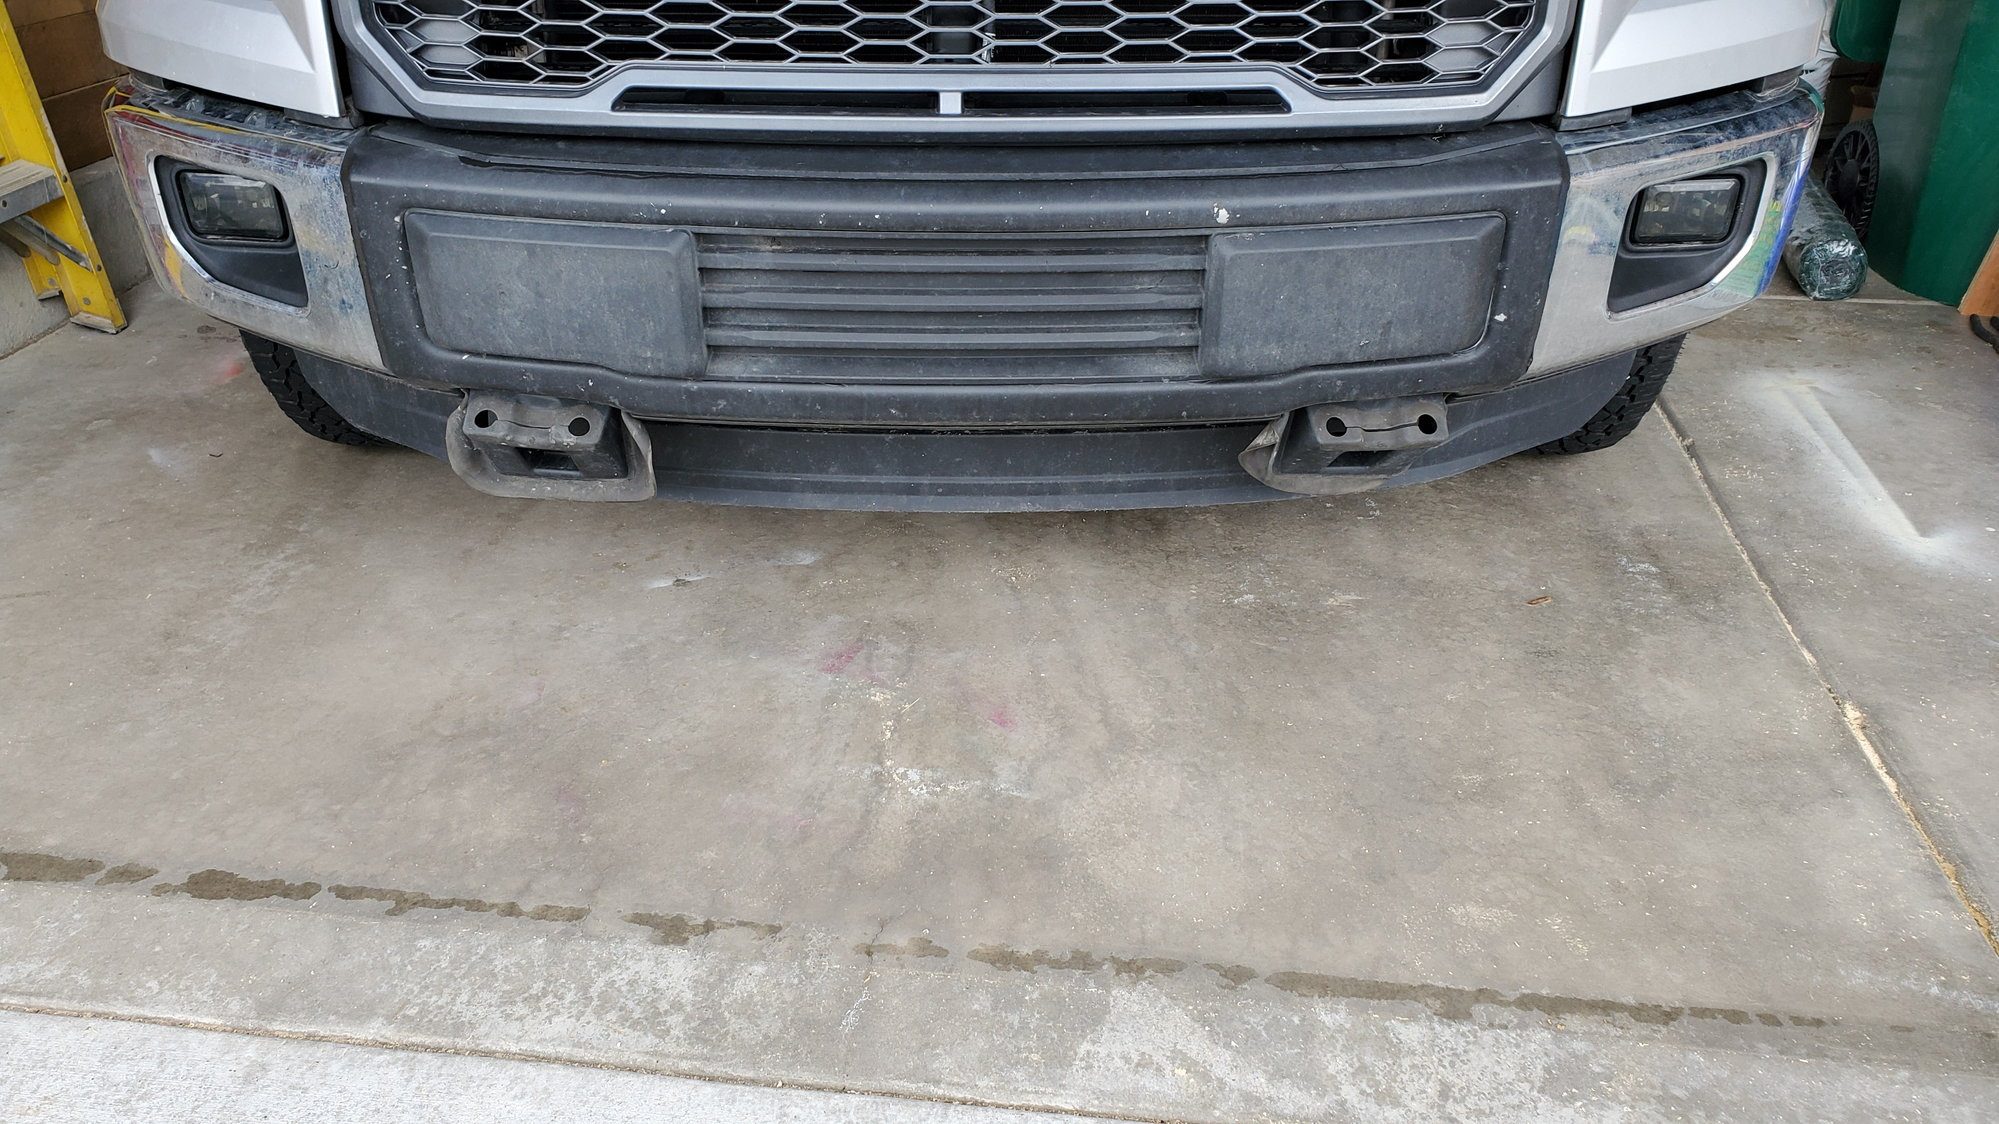 Tow hook boot re-installation? - Ford F150 Forum - Community of